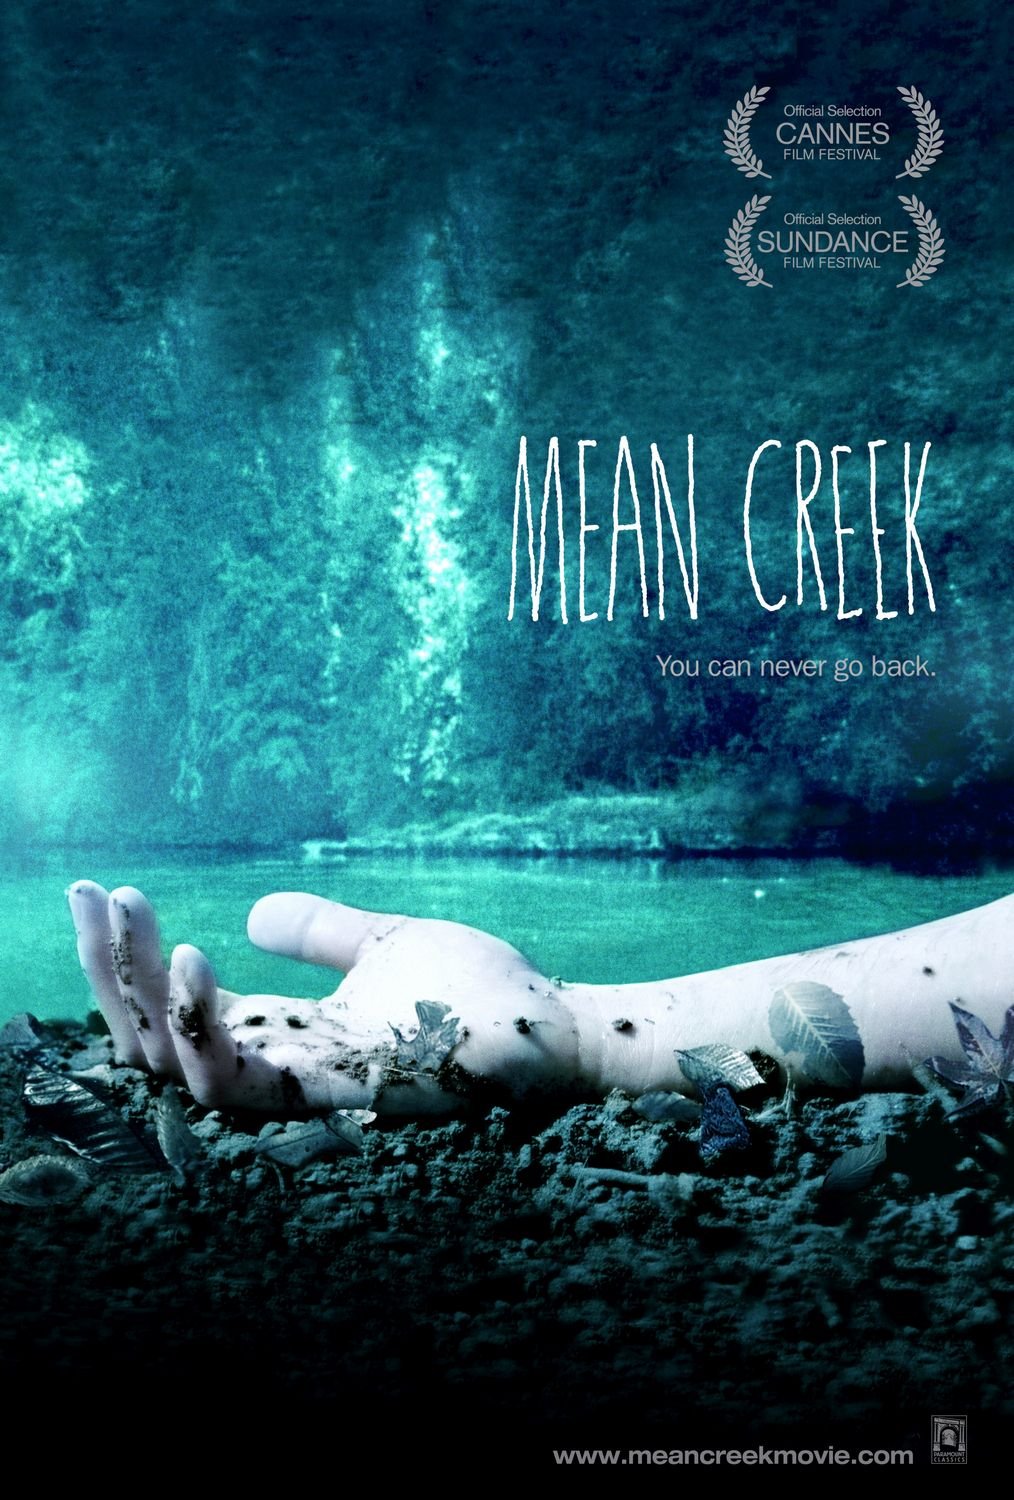 Poster of the movie Mean Creek